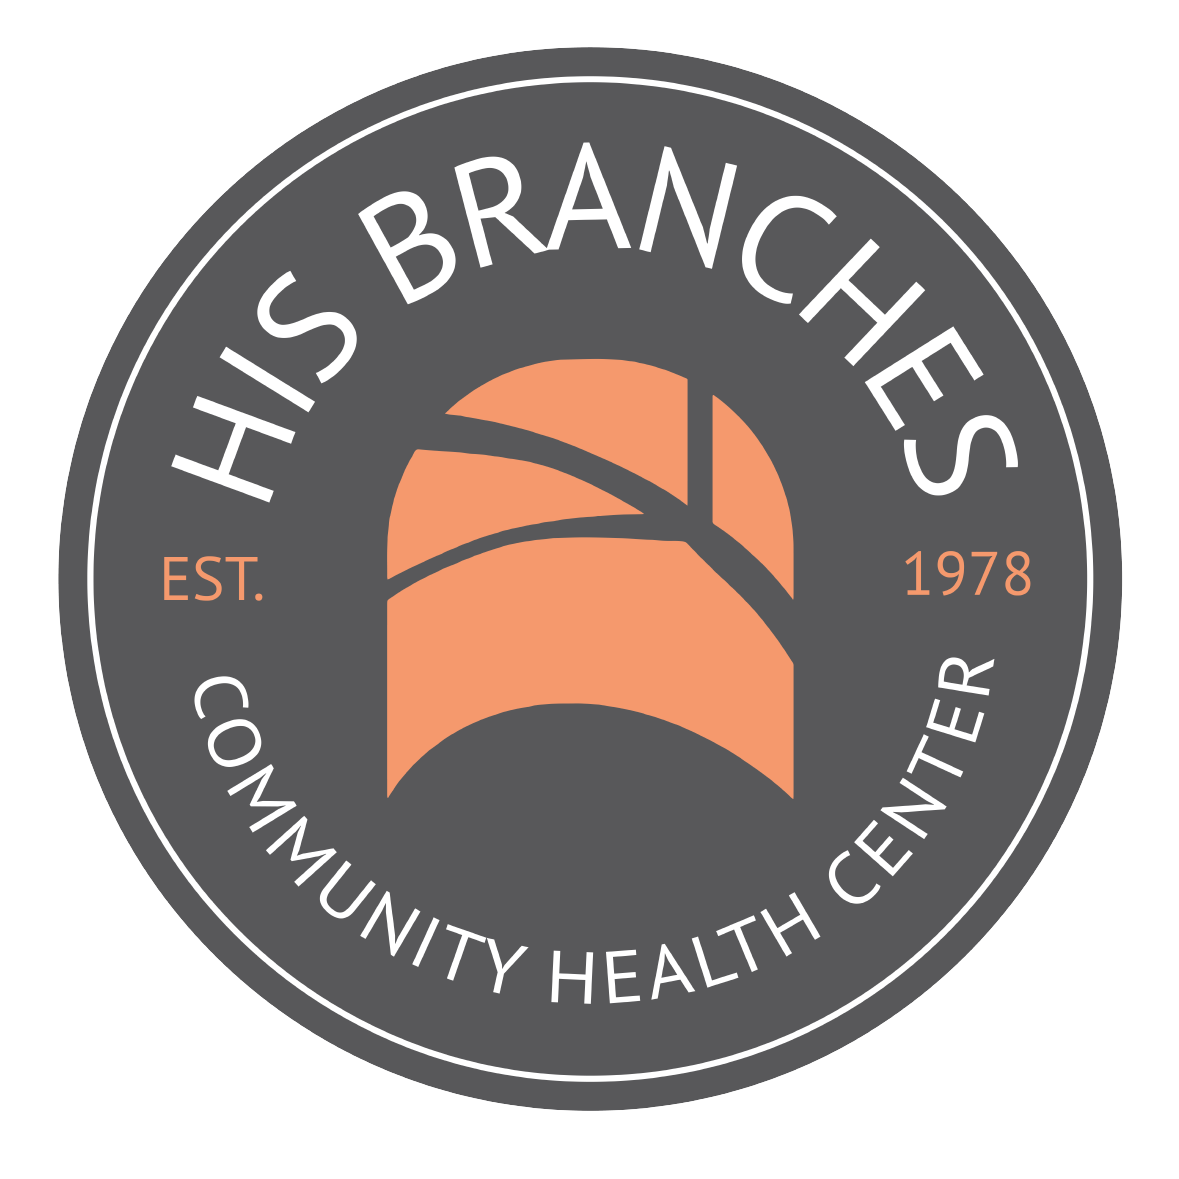 His Branches Community Health Center